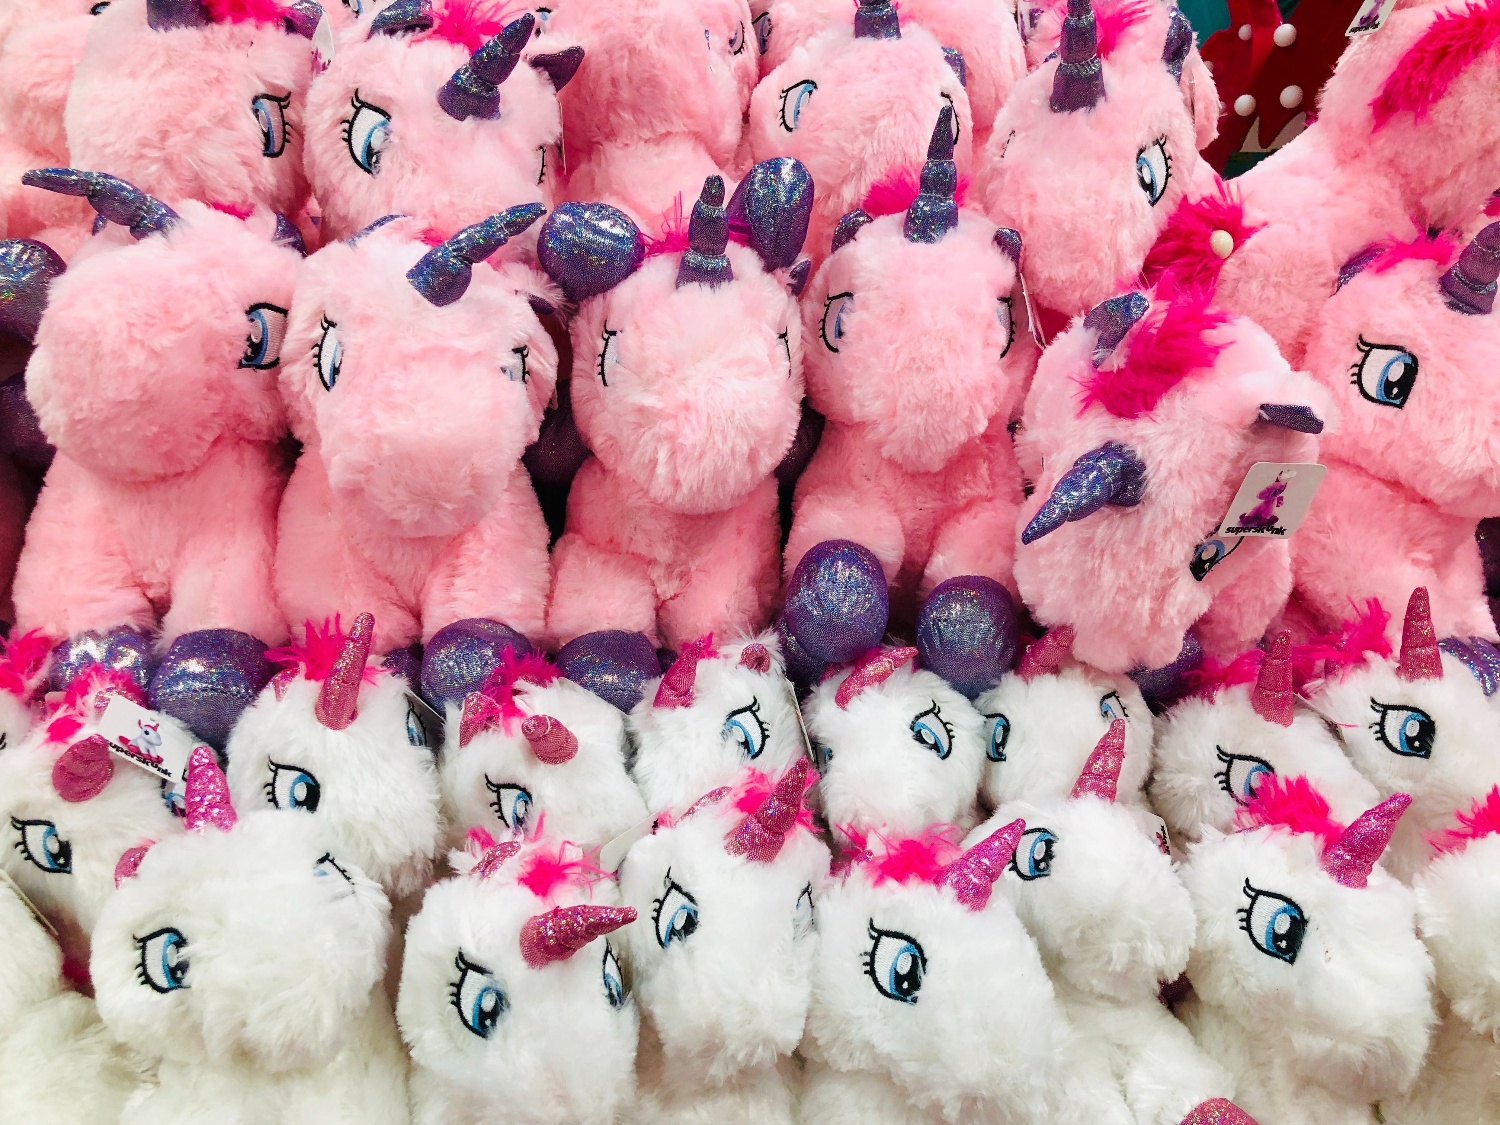 Diagram is hiring a Digital Marketing Specialist using a picture of unicorn stuffed animals to grab attention.